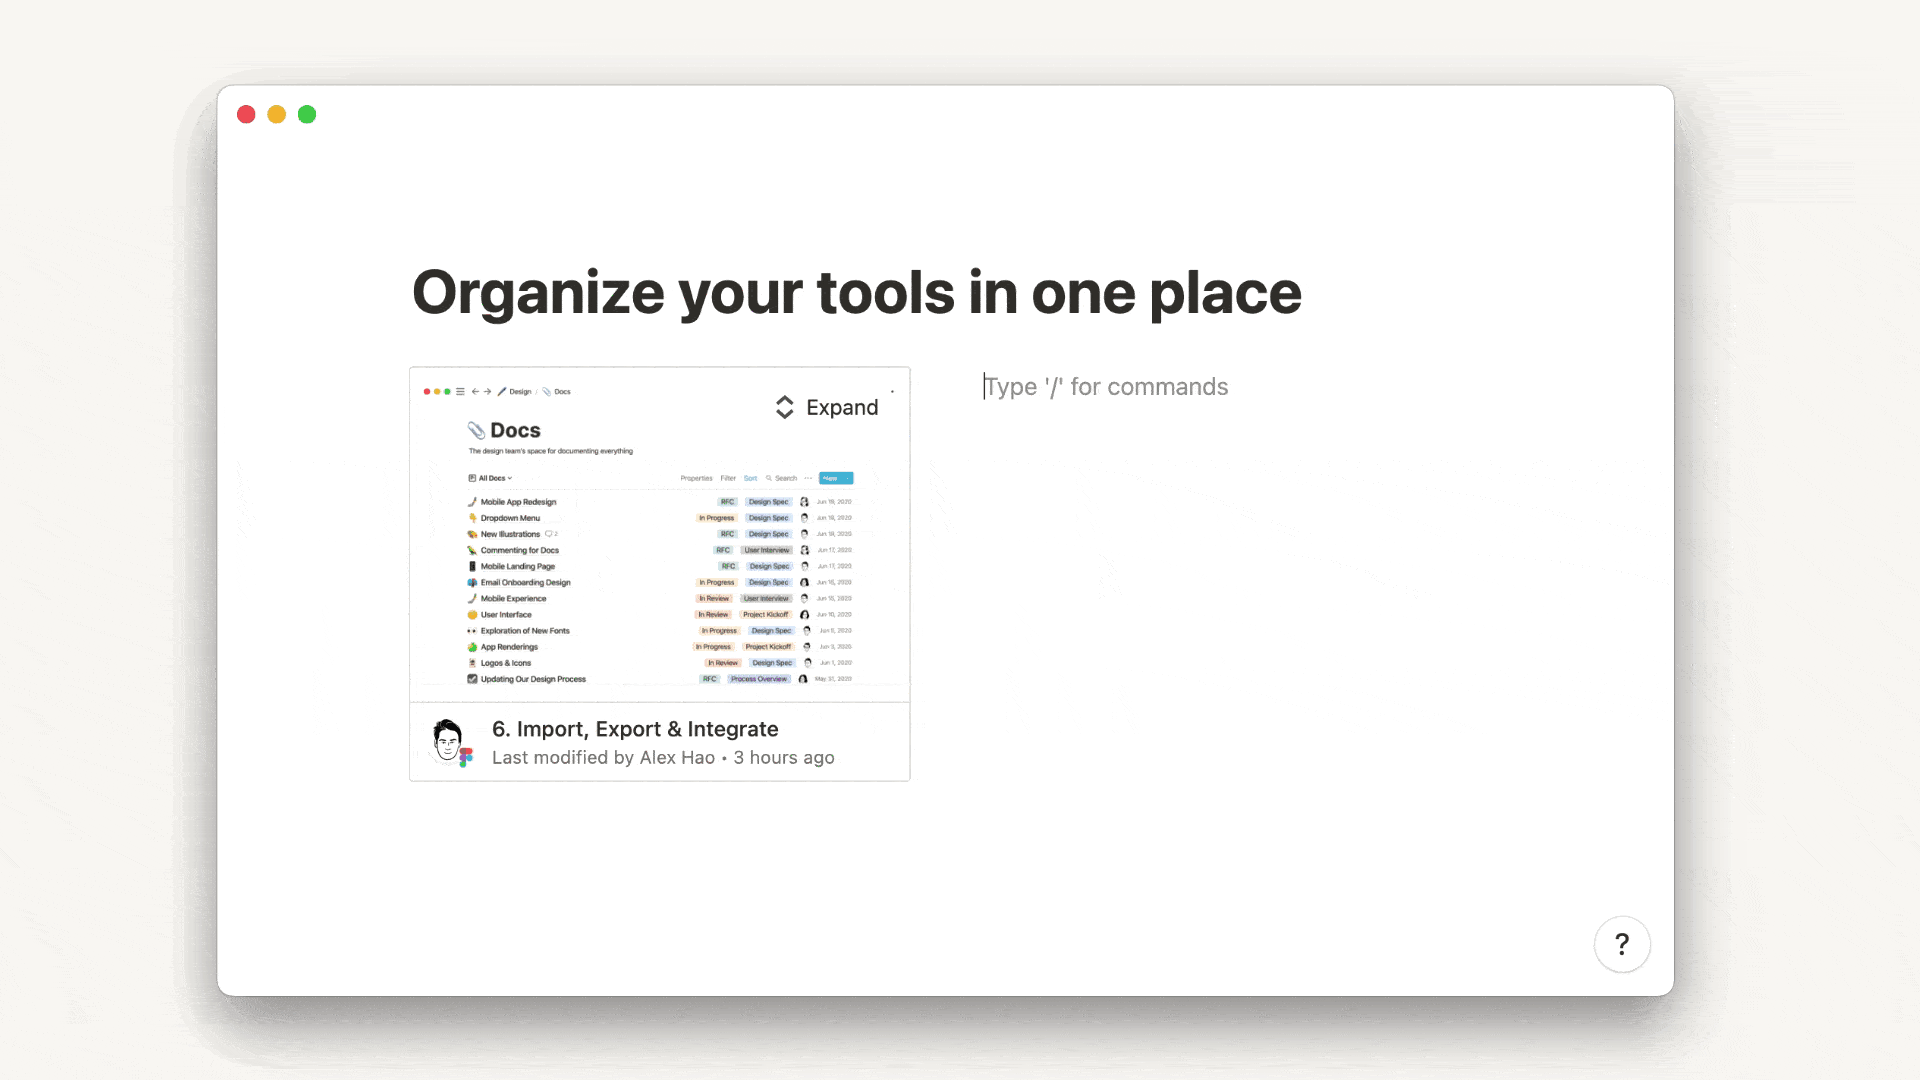 Organize your tools in one place